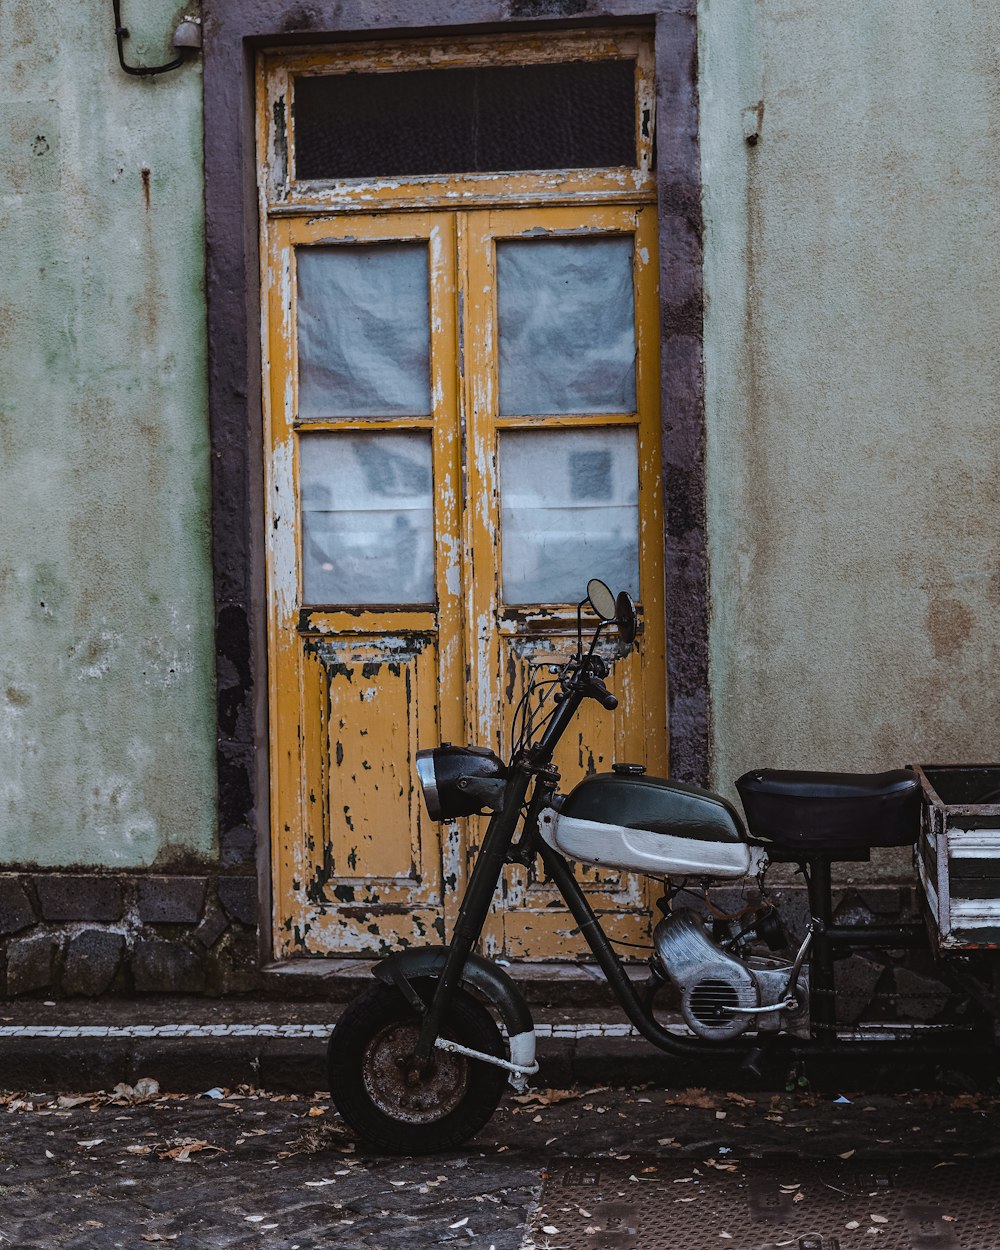 a moped parked in front of a yellow door